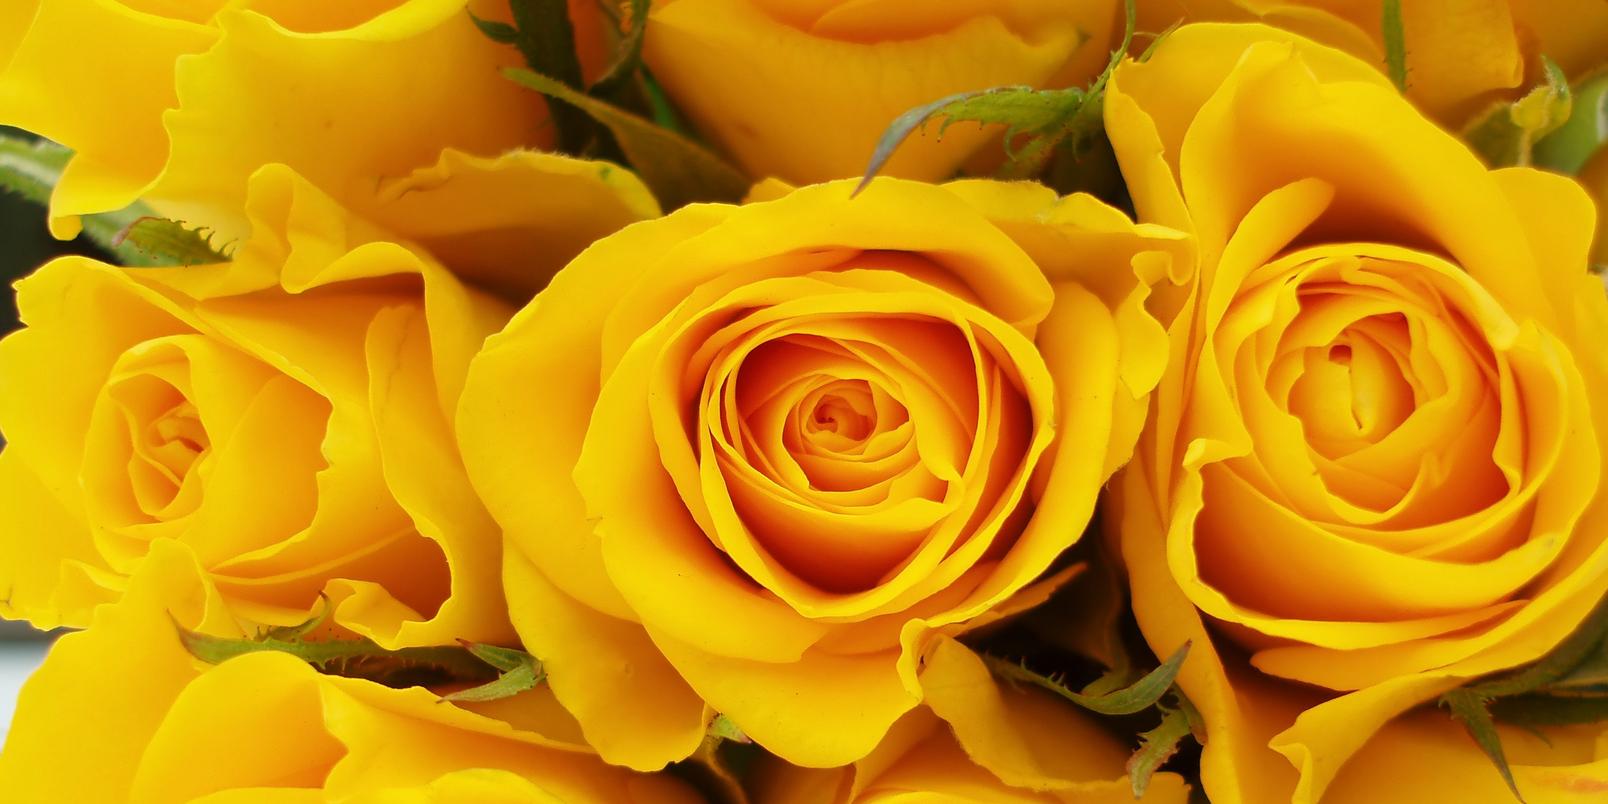 roses-yellow-flowers-bunch